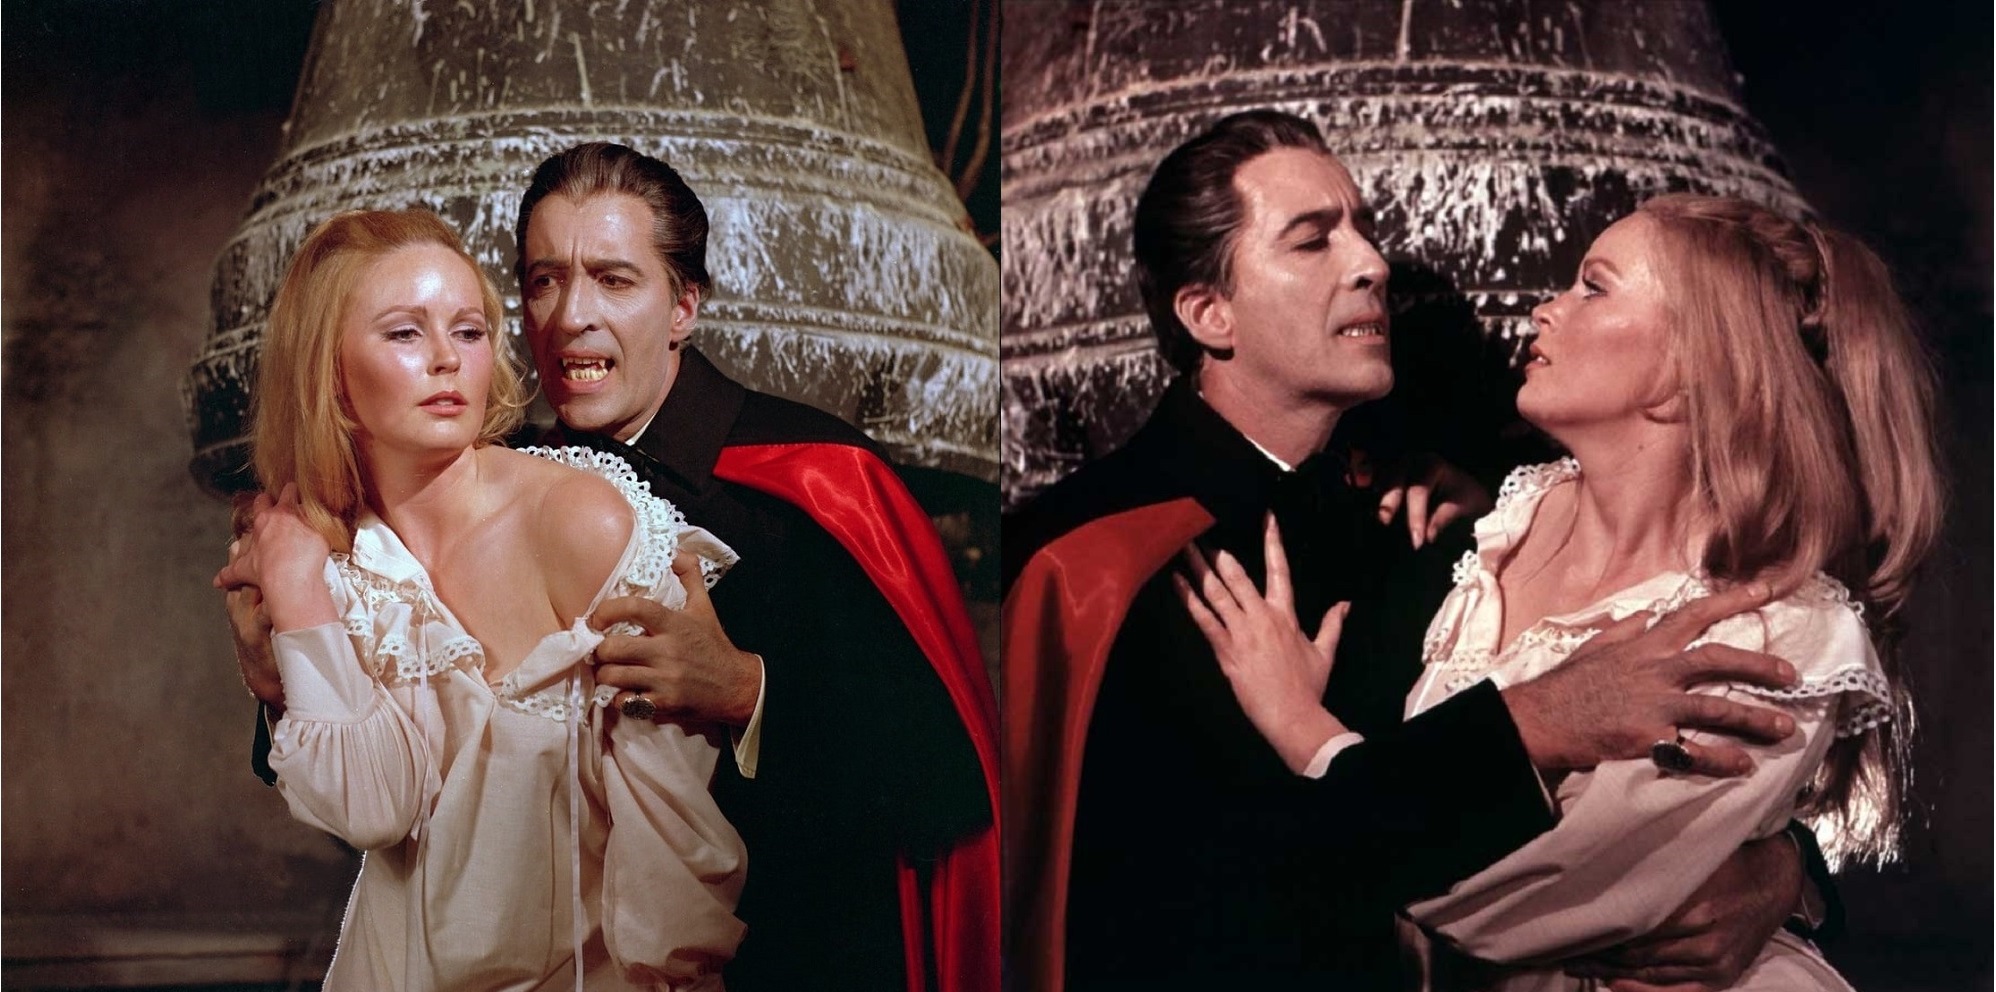 Dracula (Christopher Lee) menaces Veronica Carlson in Dracula Has Risen from the Grave (1968)